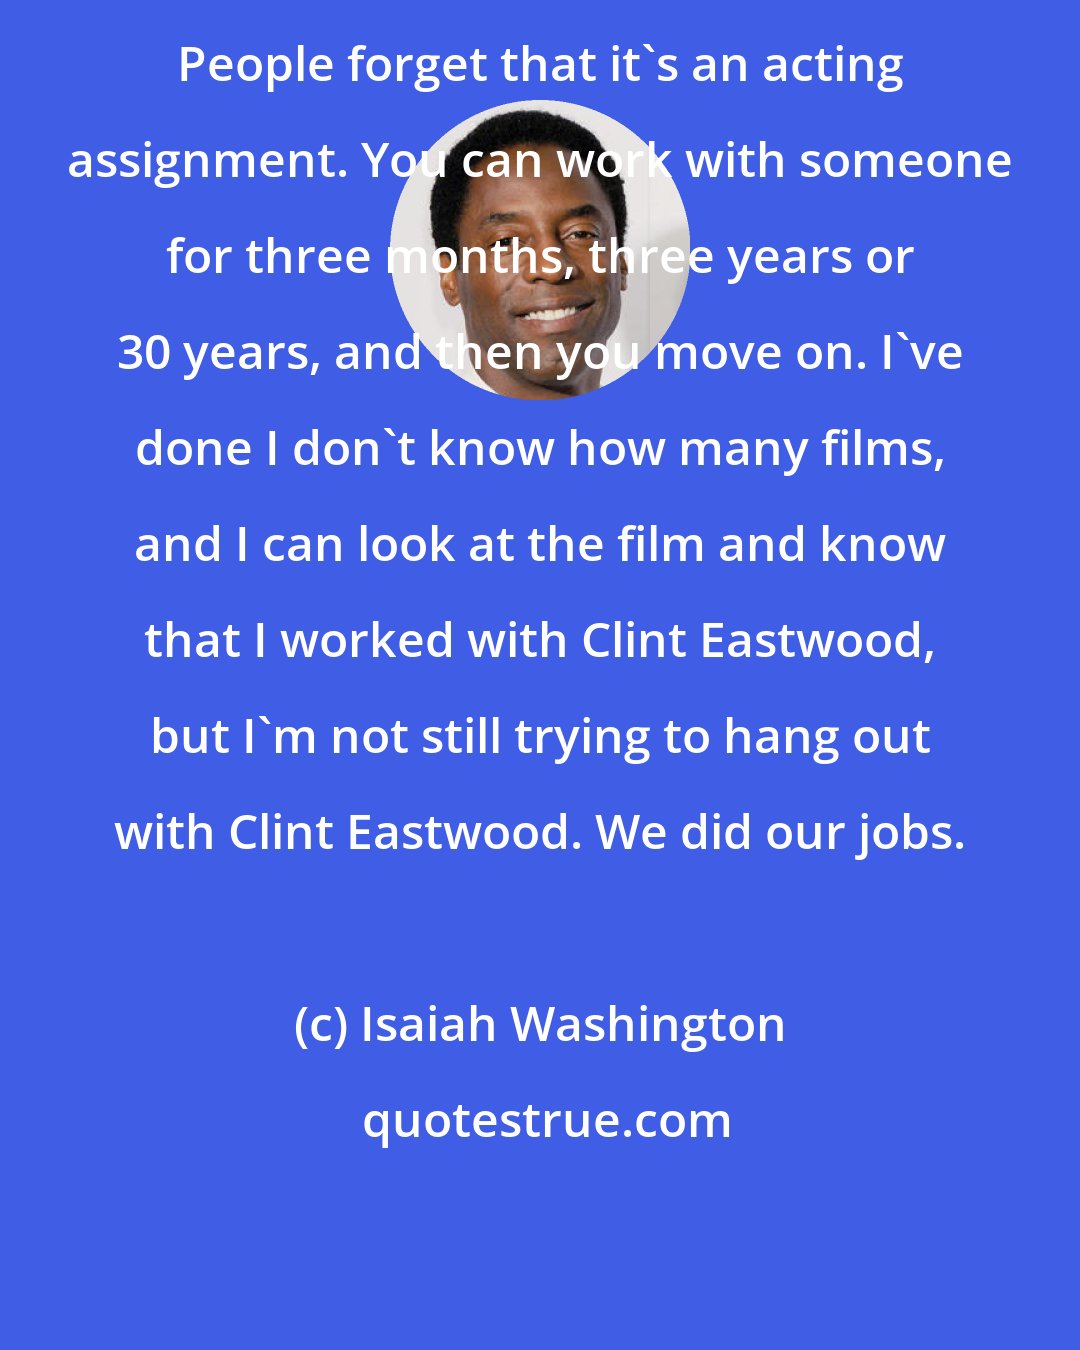 Isaiah Washington: People forget that it's an acting assignment. You can work with someone for three months, three years or 30 years, and then you move on. I've done I don't know how many films, and I can look at the film and know that I worked with Clint Eastwood, but I'm not still trying to hang out with Clint Eastwood. We did our jobs.